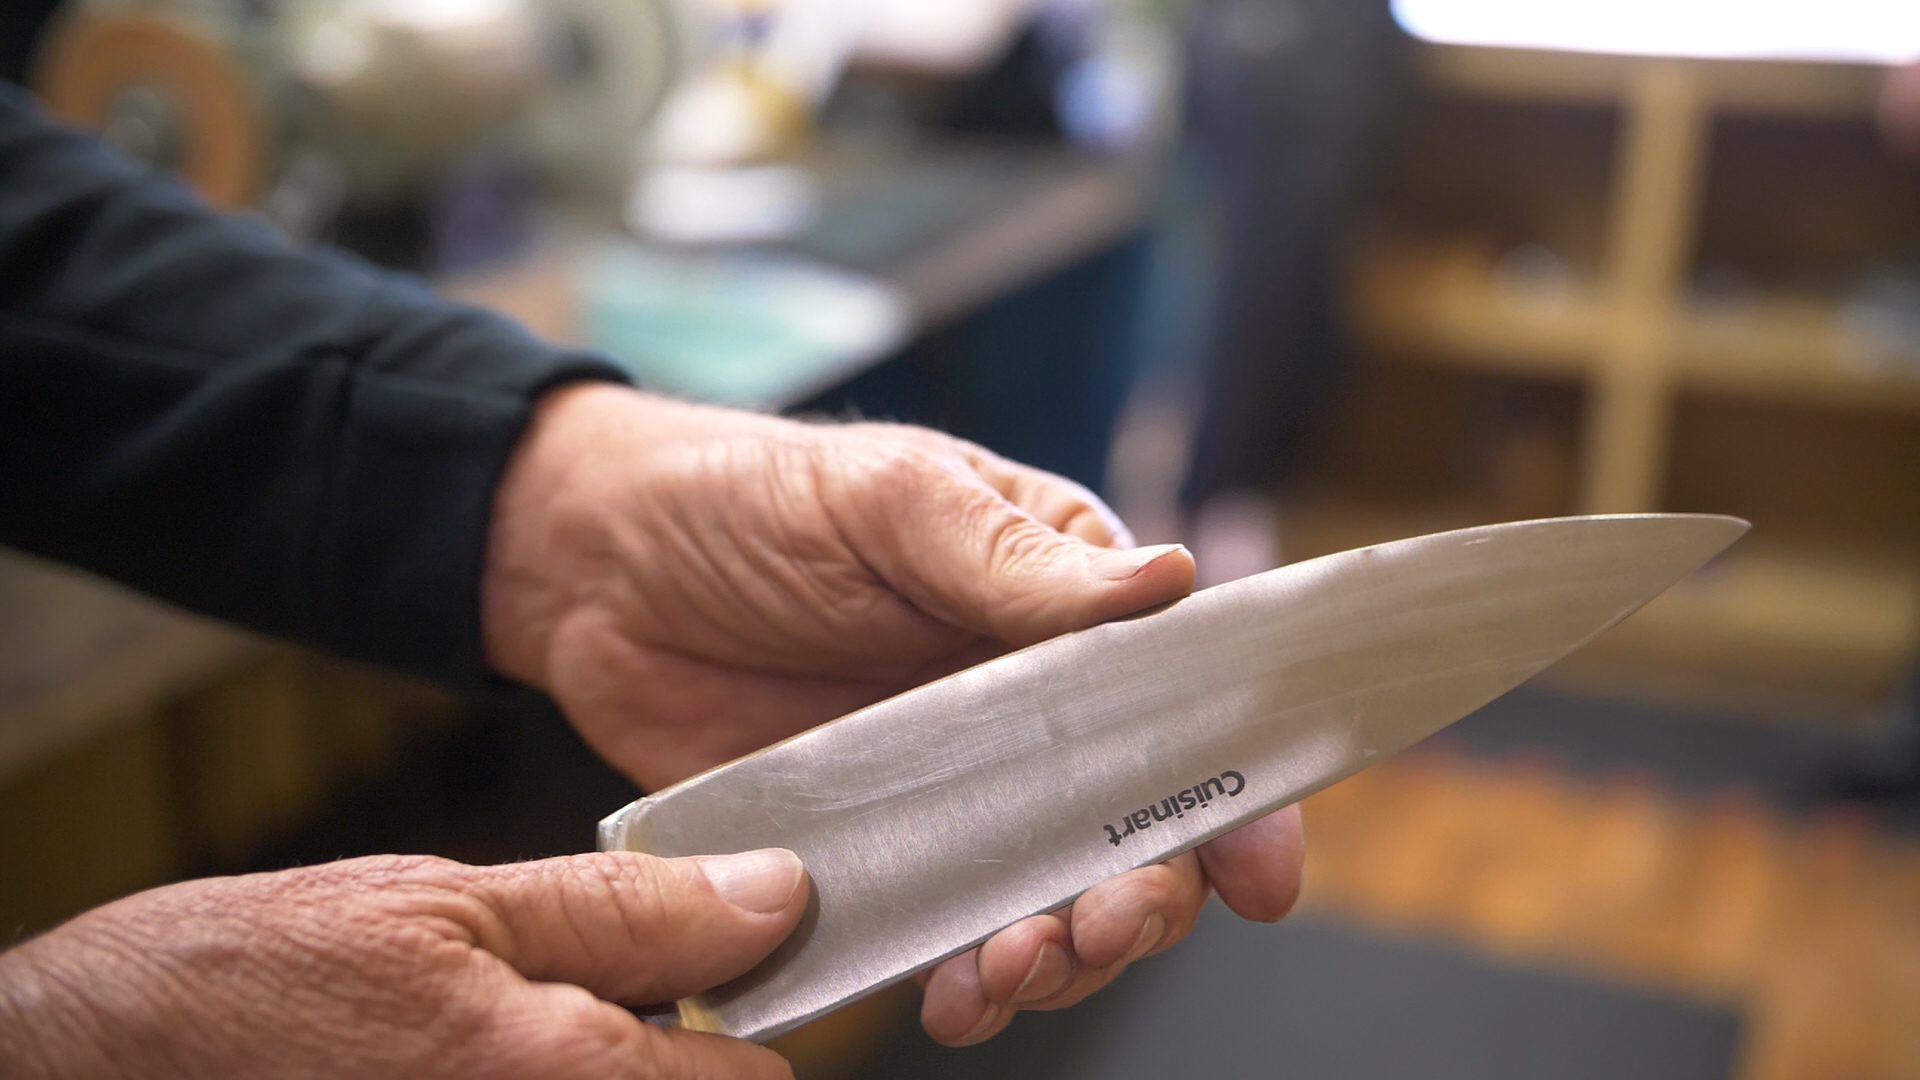 How to Sharpen a Knife Like a Pro